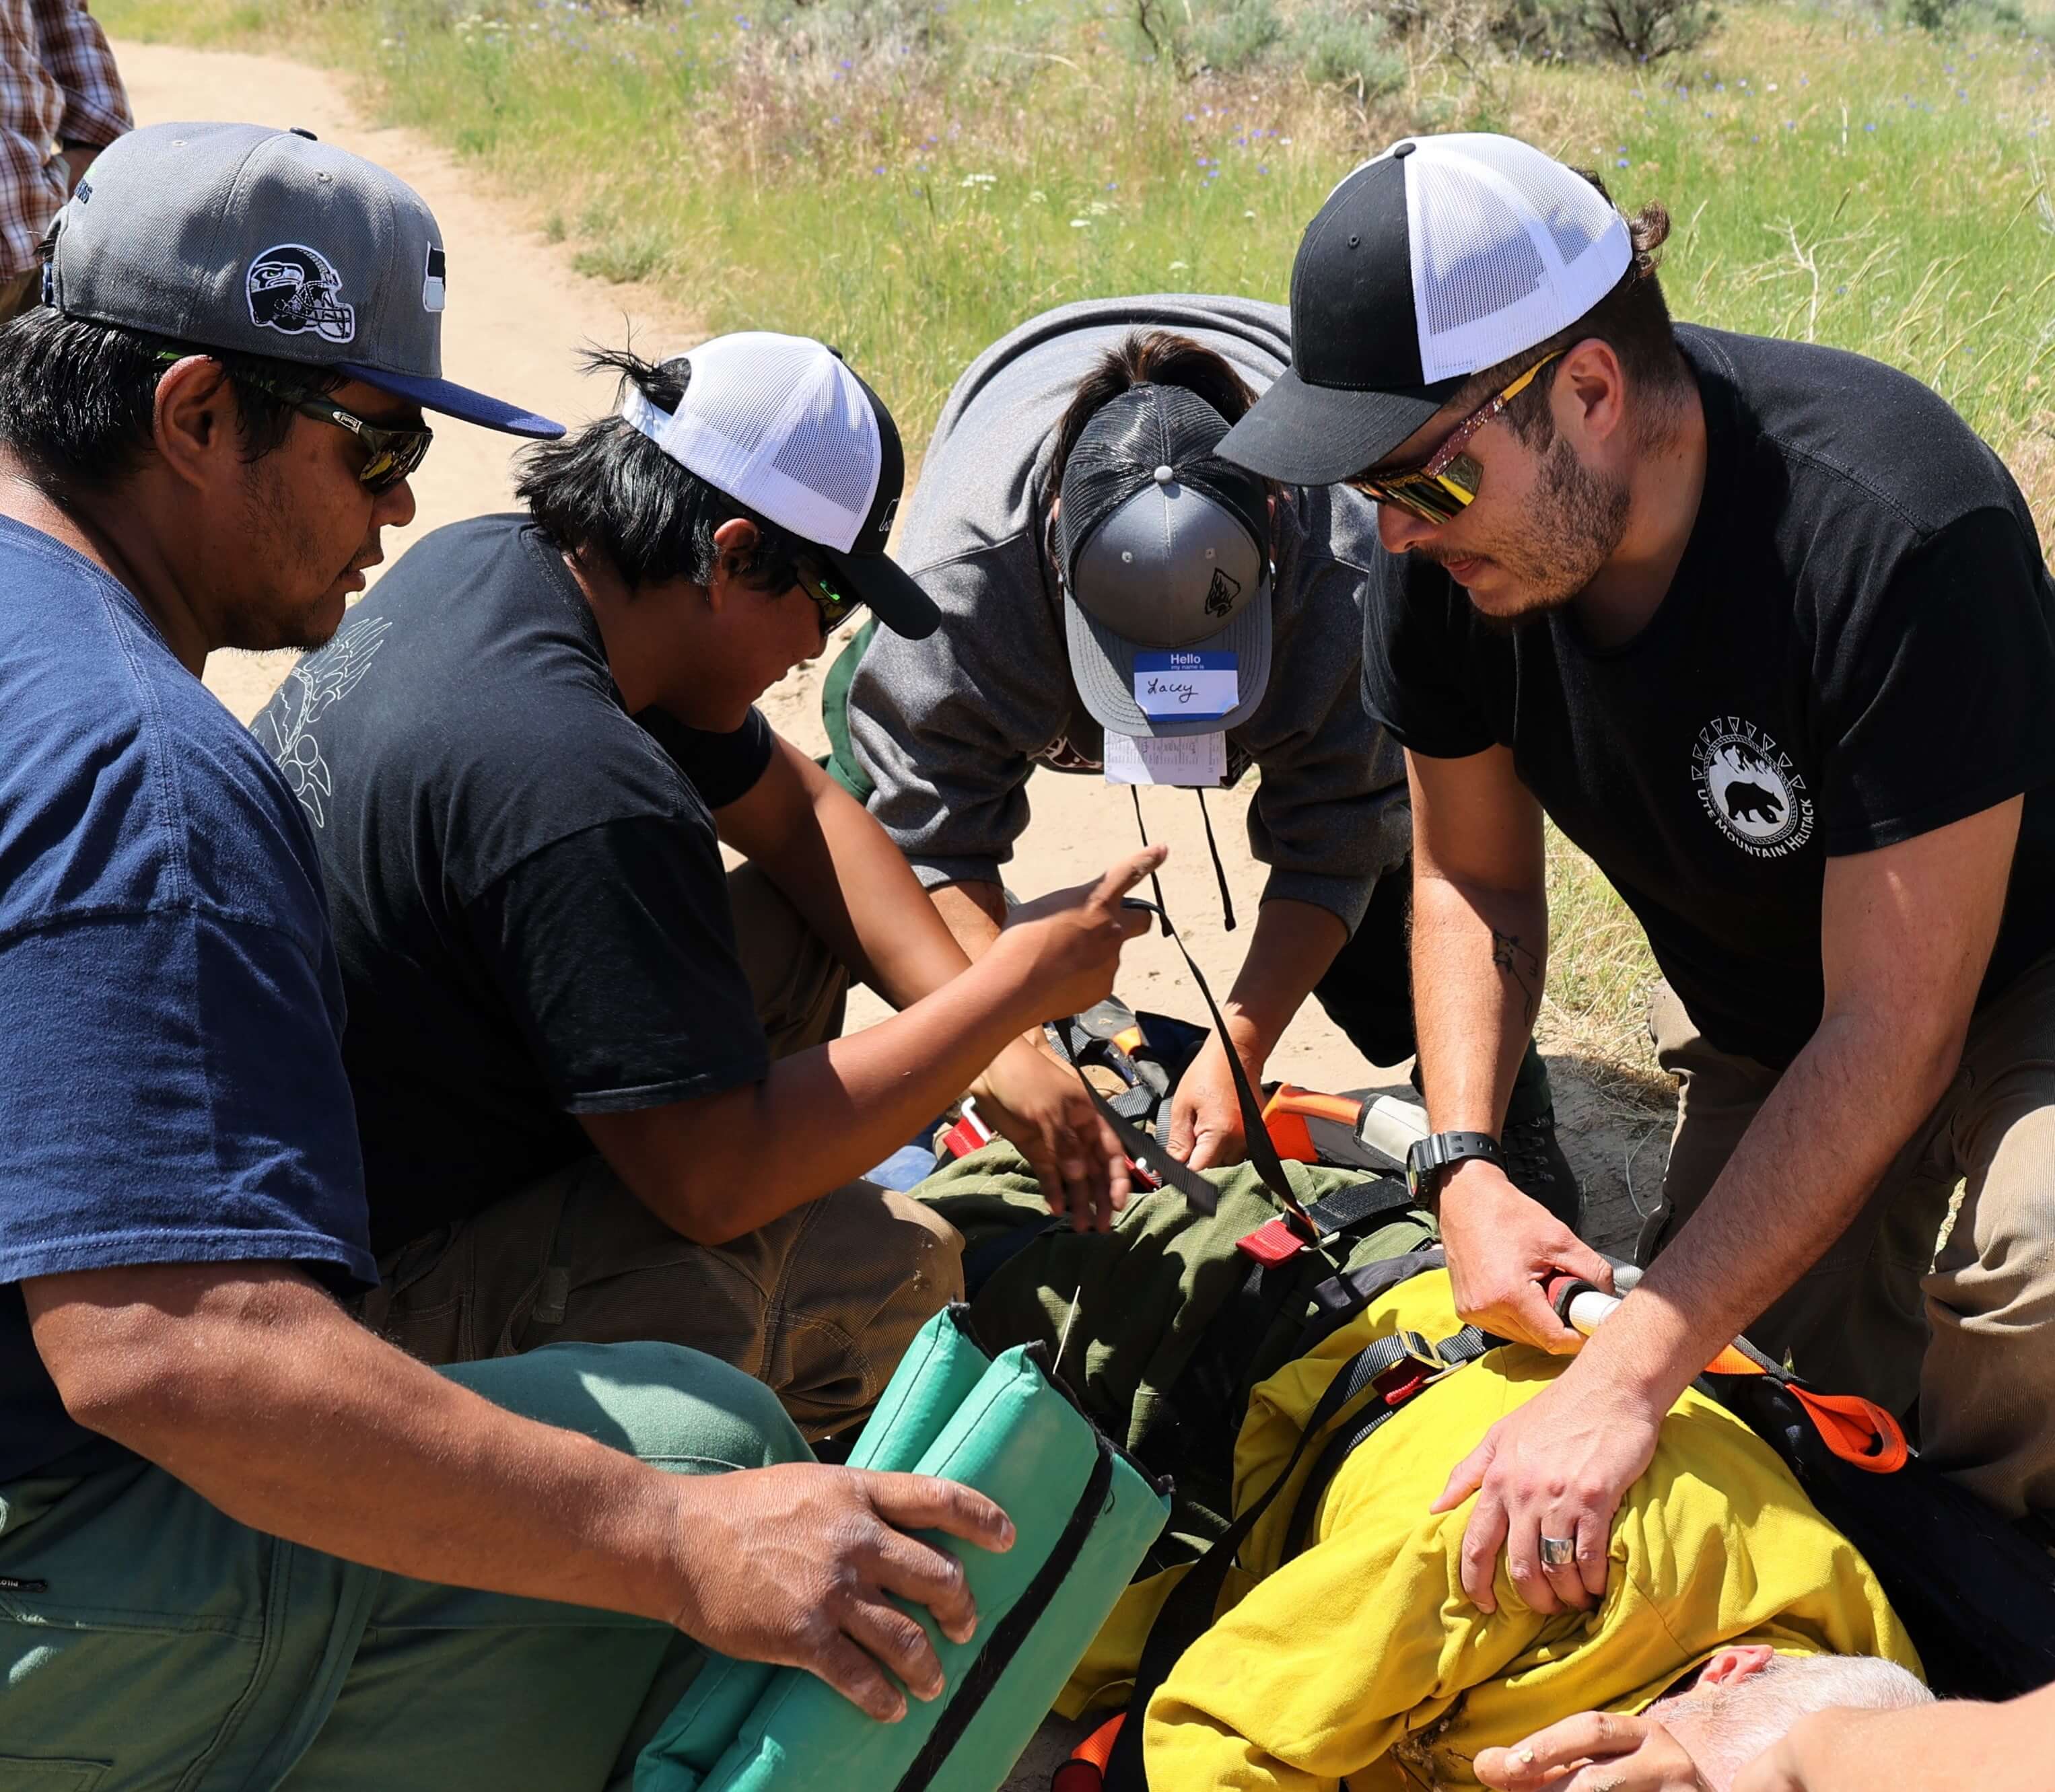 Medical Incident Technician training participants take part in a practice medical scenario outdoors.